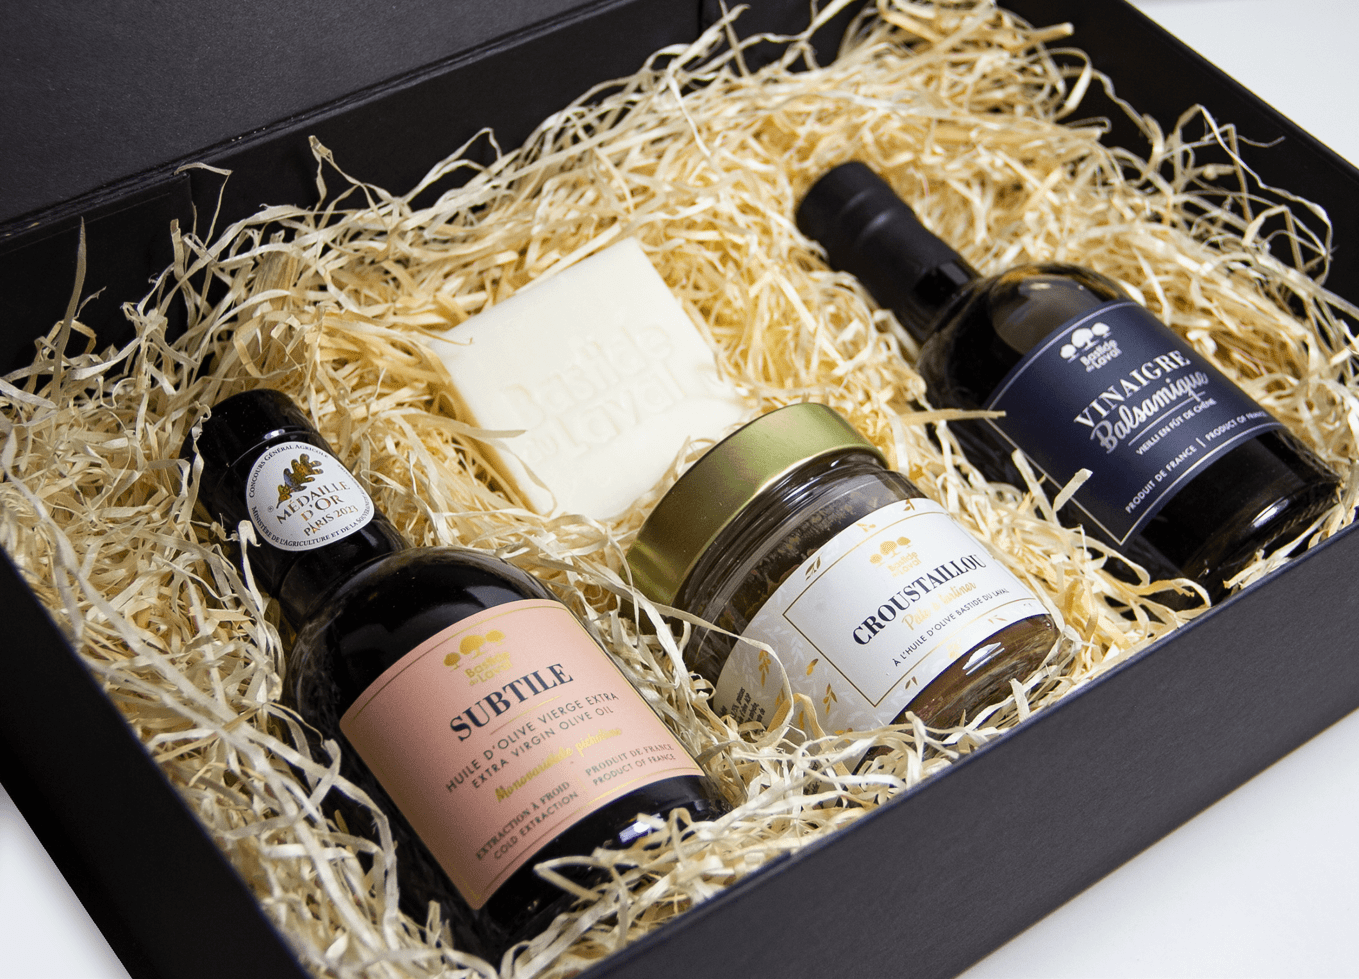 Discovery gift box